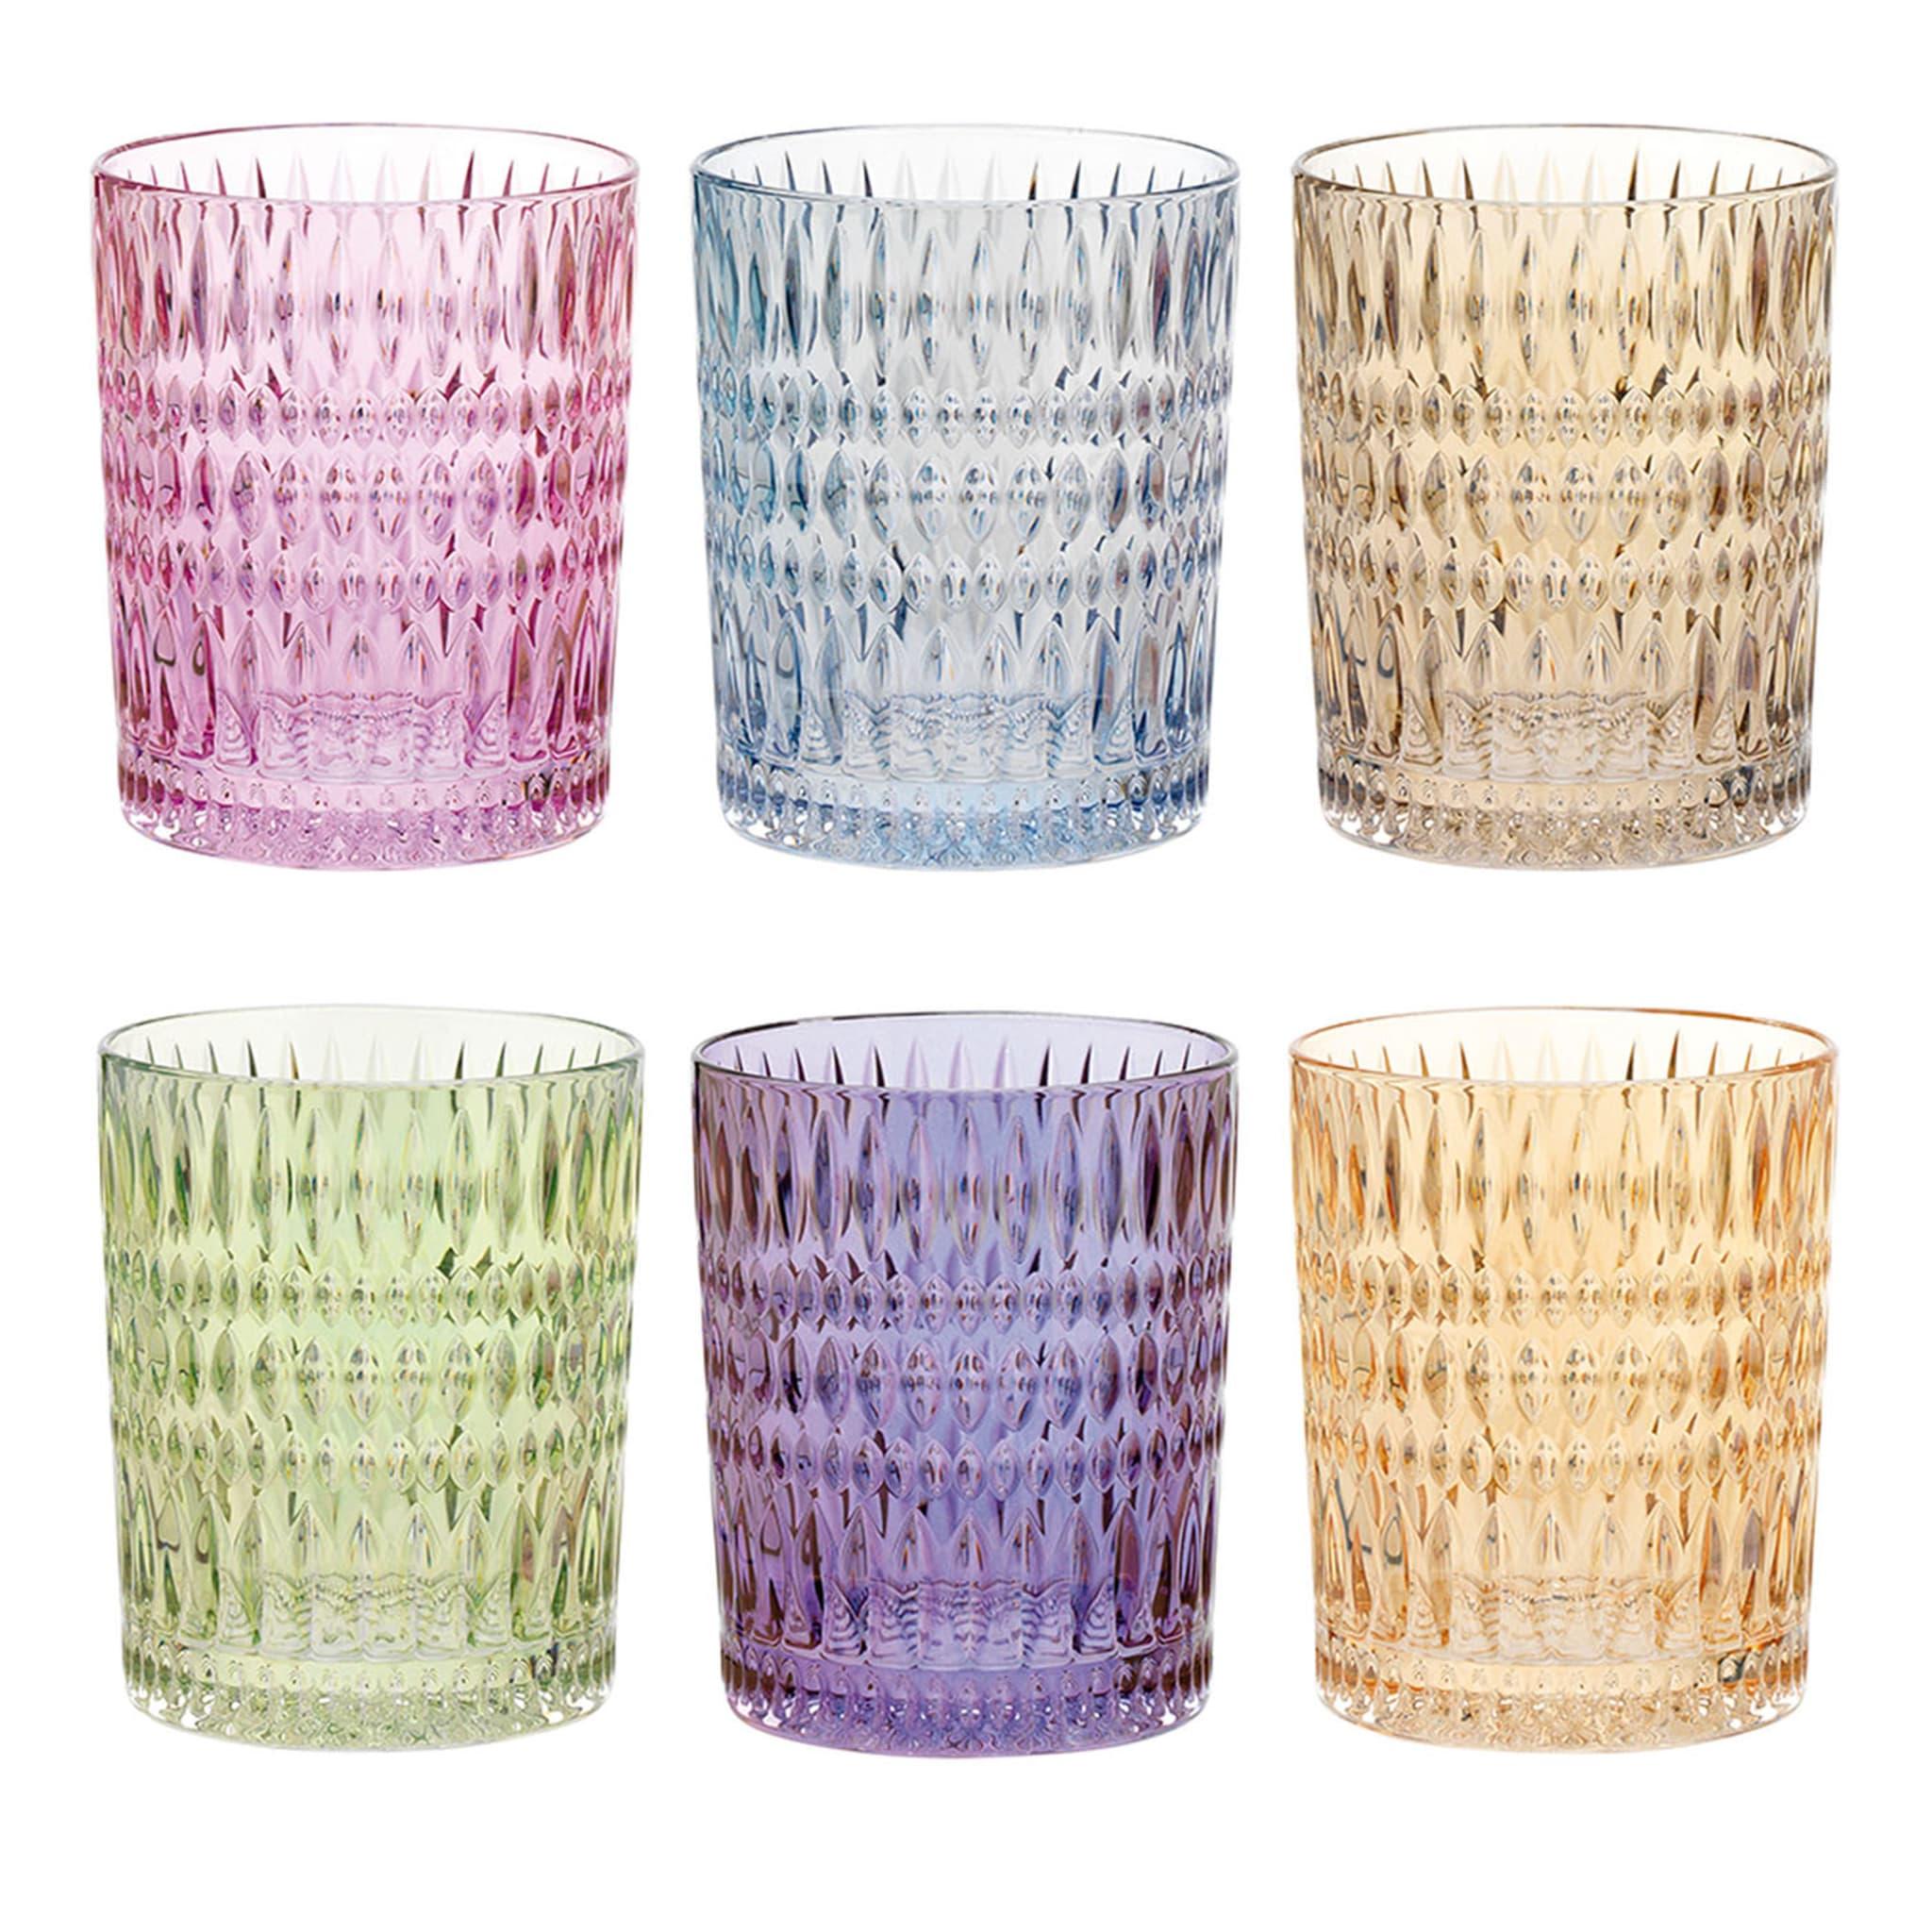 Precious and colorful, this set counts six water glasses whose minimalist shape gets counterbalanced by an eccentric mix of minute etchings and hues. Each glass flaunts a different hue - pink, azure, purple, beige, yellow, and green, respectively -